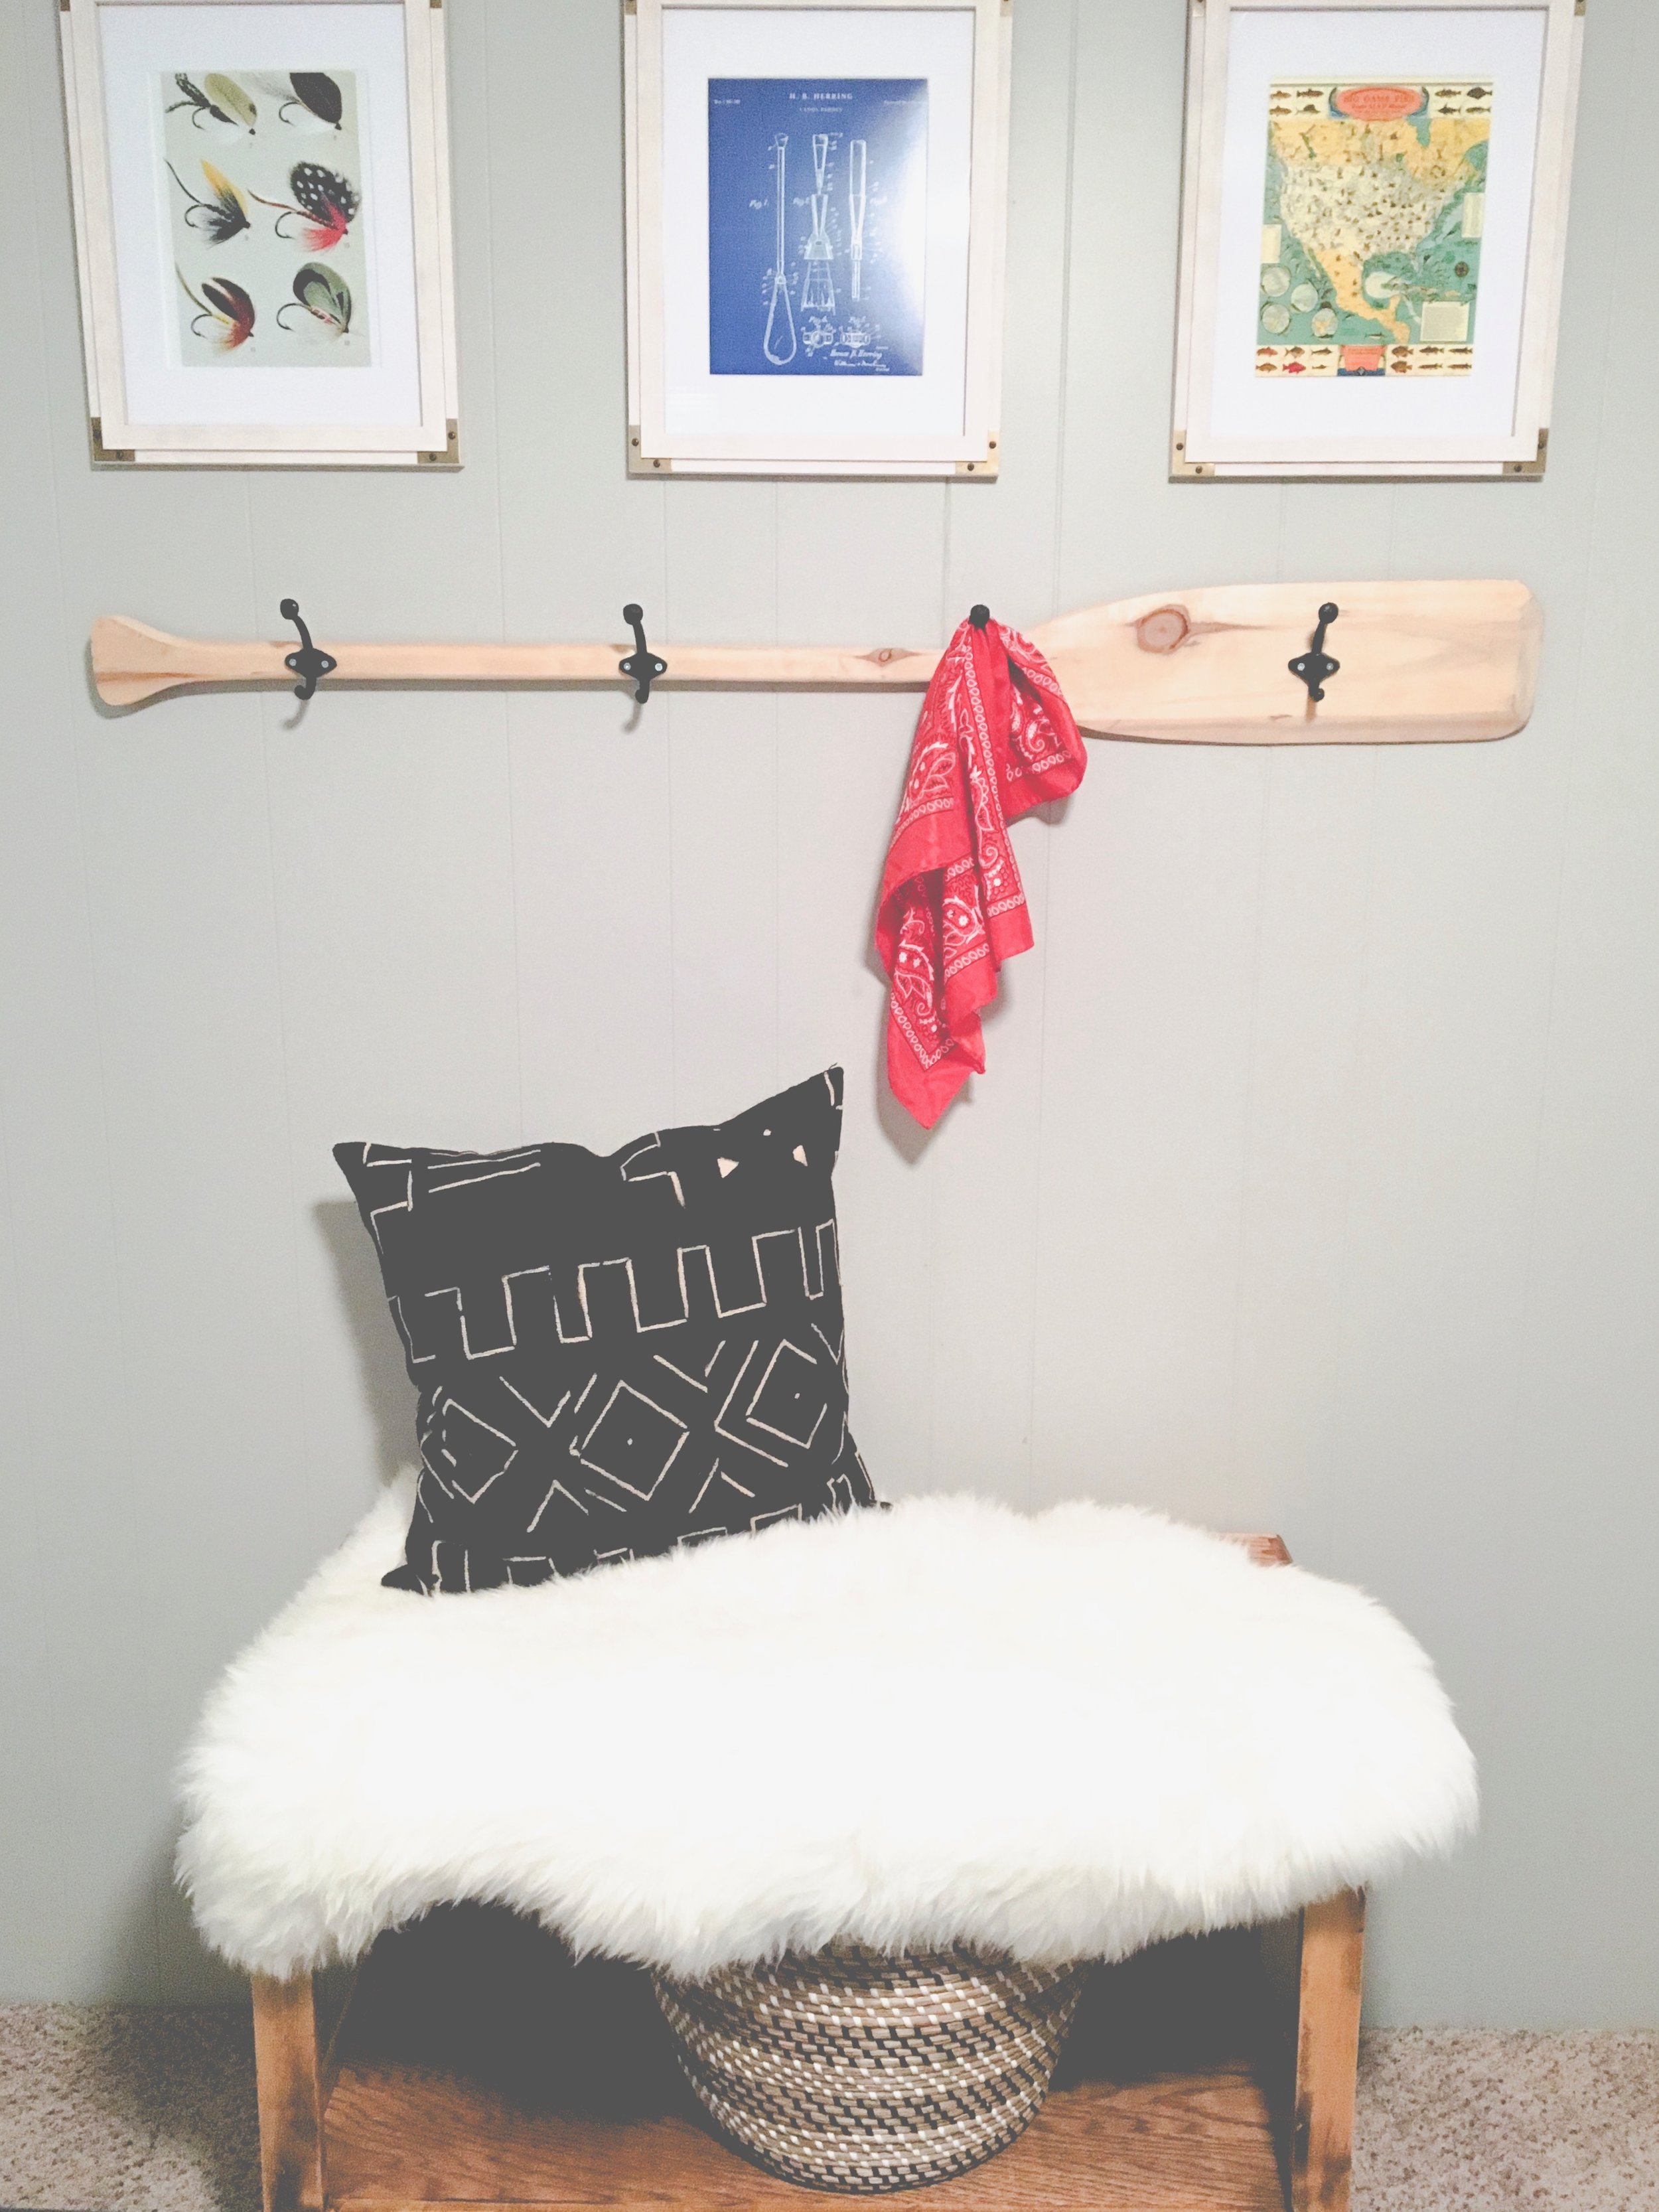 Our boring guest room gets a whole new modern cozy chic cabin look! Learn how to redecorate your guest room so it feels cozy and welcoming. This wooden oar hook and vintage fishing prints are a great touch.